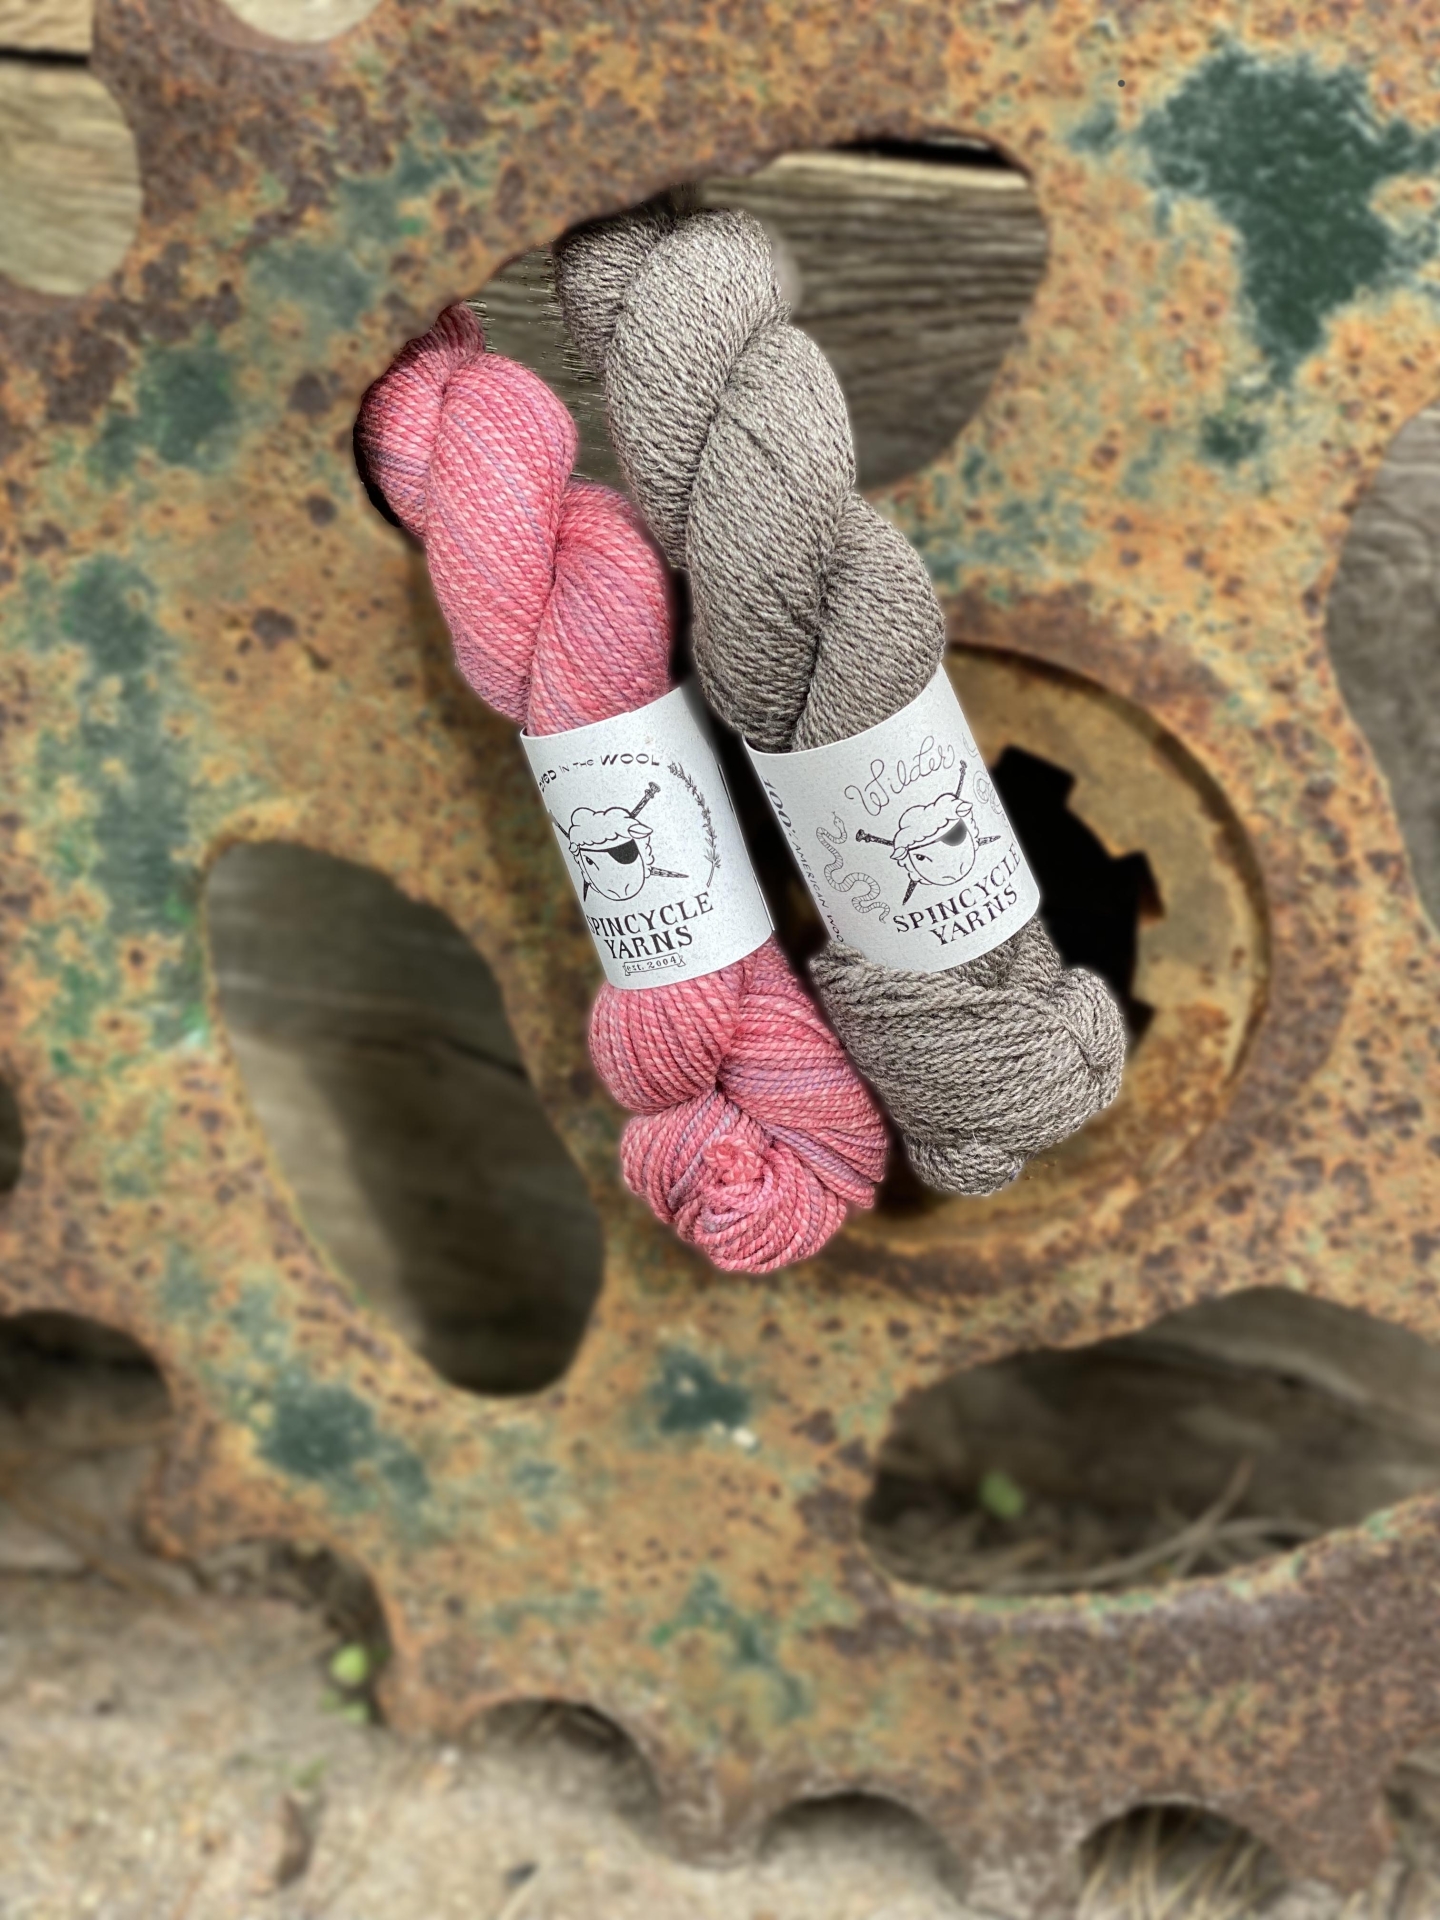 Ouachita bundle colours: dark grey Spincycle Wilder & Wallflower Spincycle Dyed in the wool